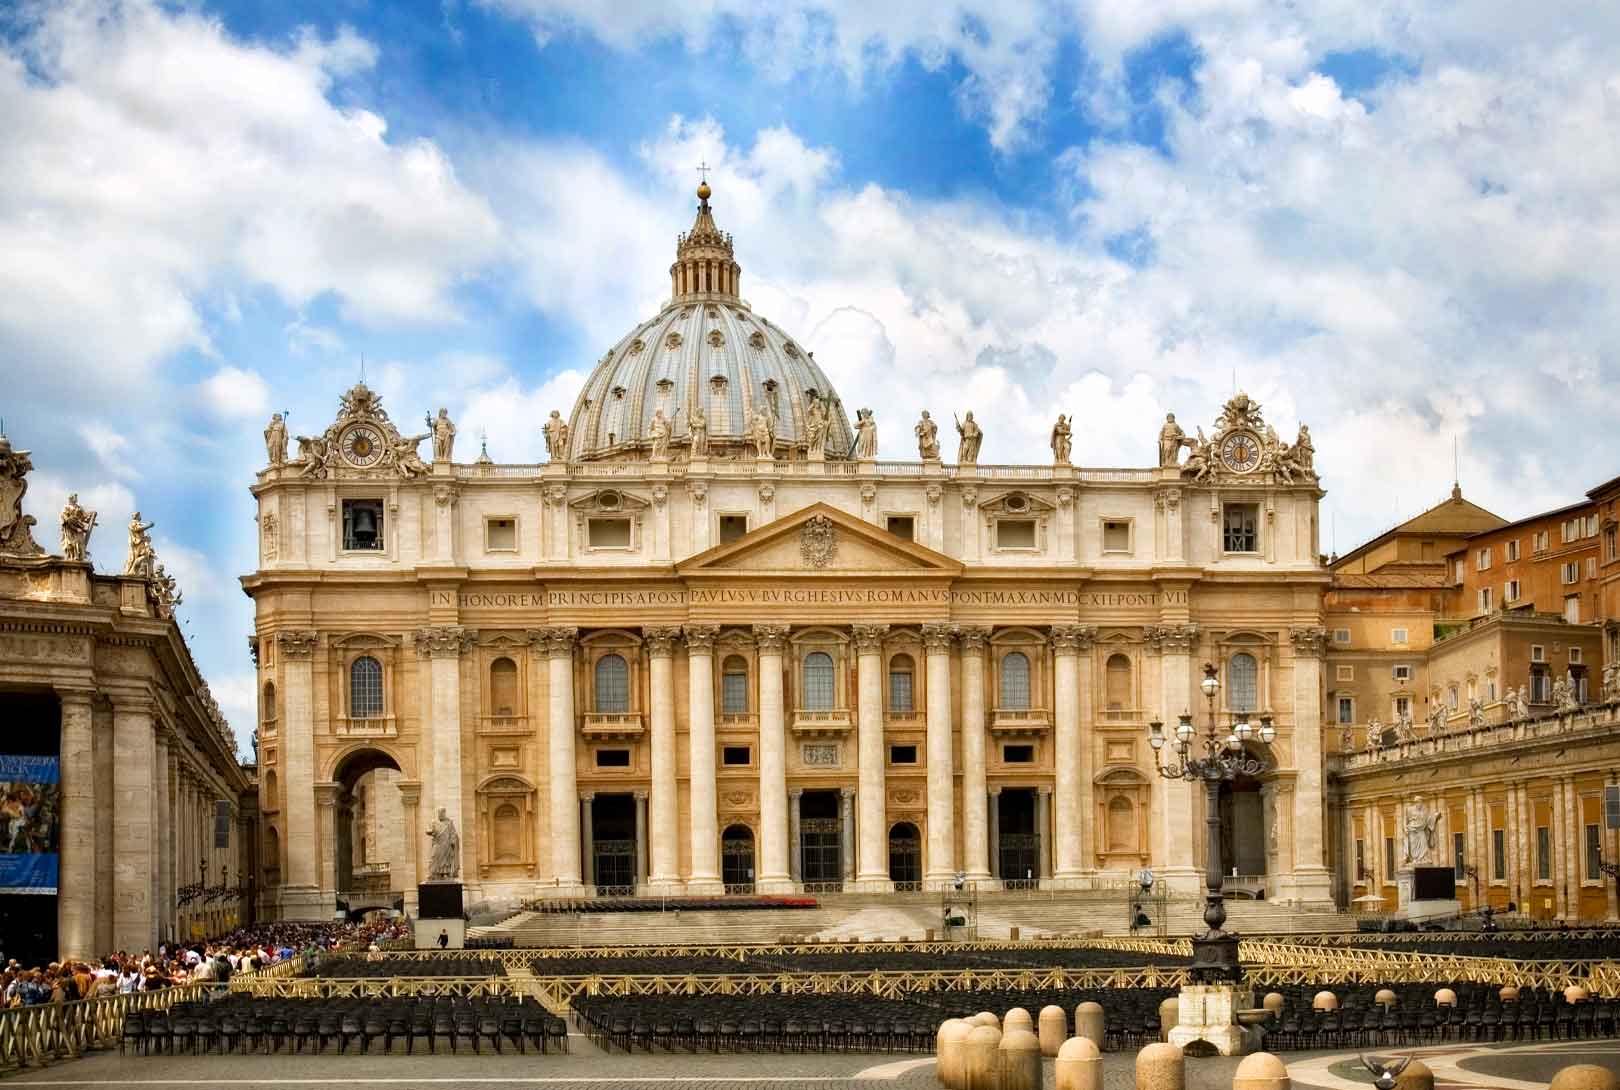 St. Peter’s Basilica In Rome Italy